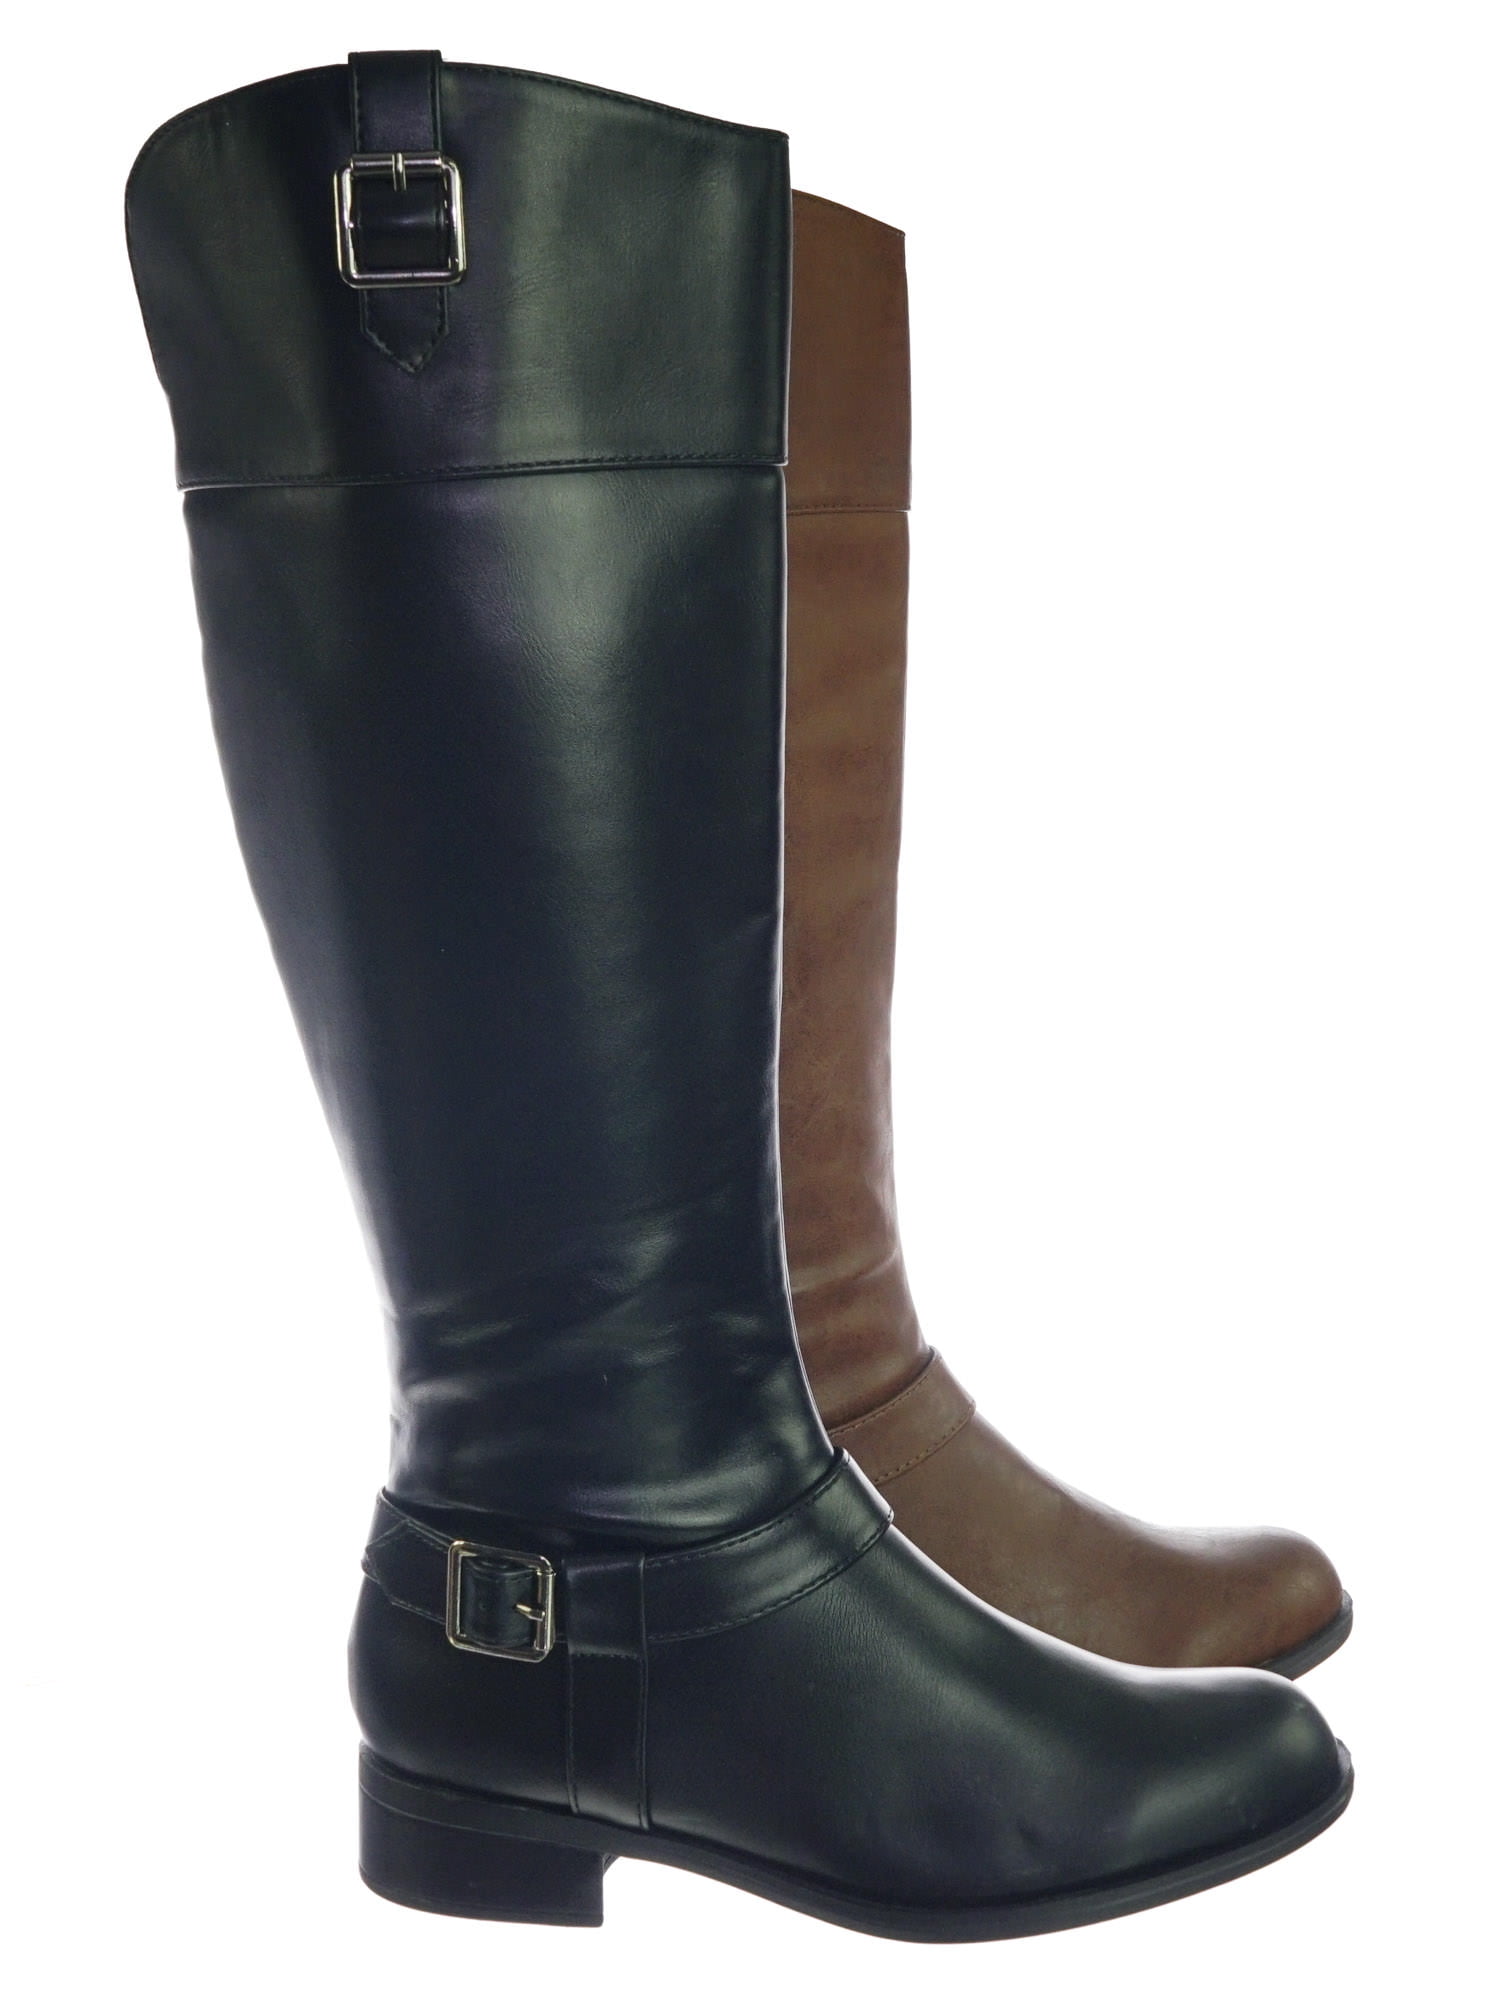 SODA - Carpet by Soda, Womens Fashion Riding Boot w Harness and Block ...